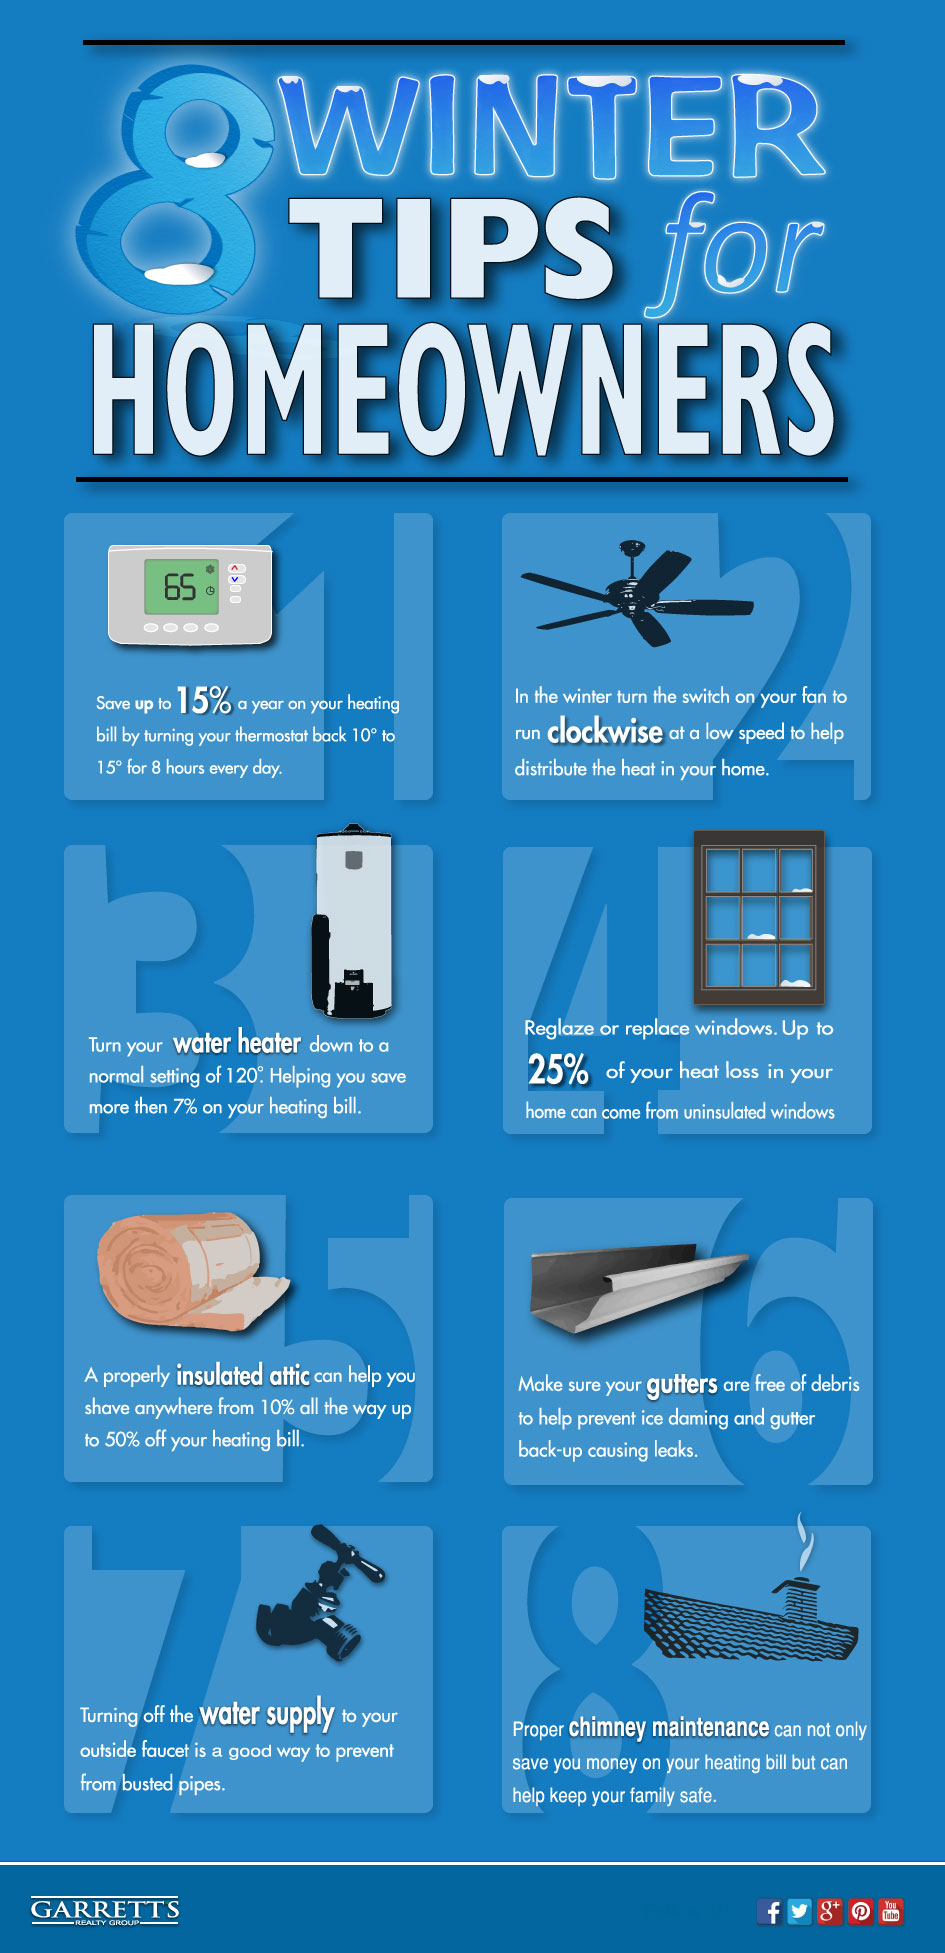 8 Winter Tips for Homeowners Infographic